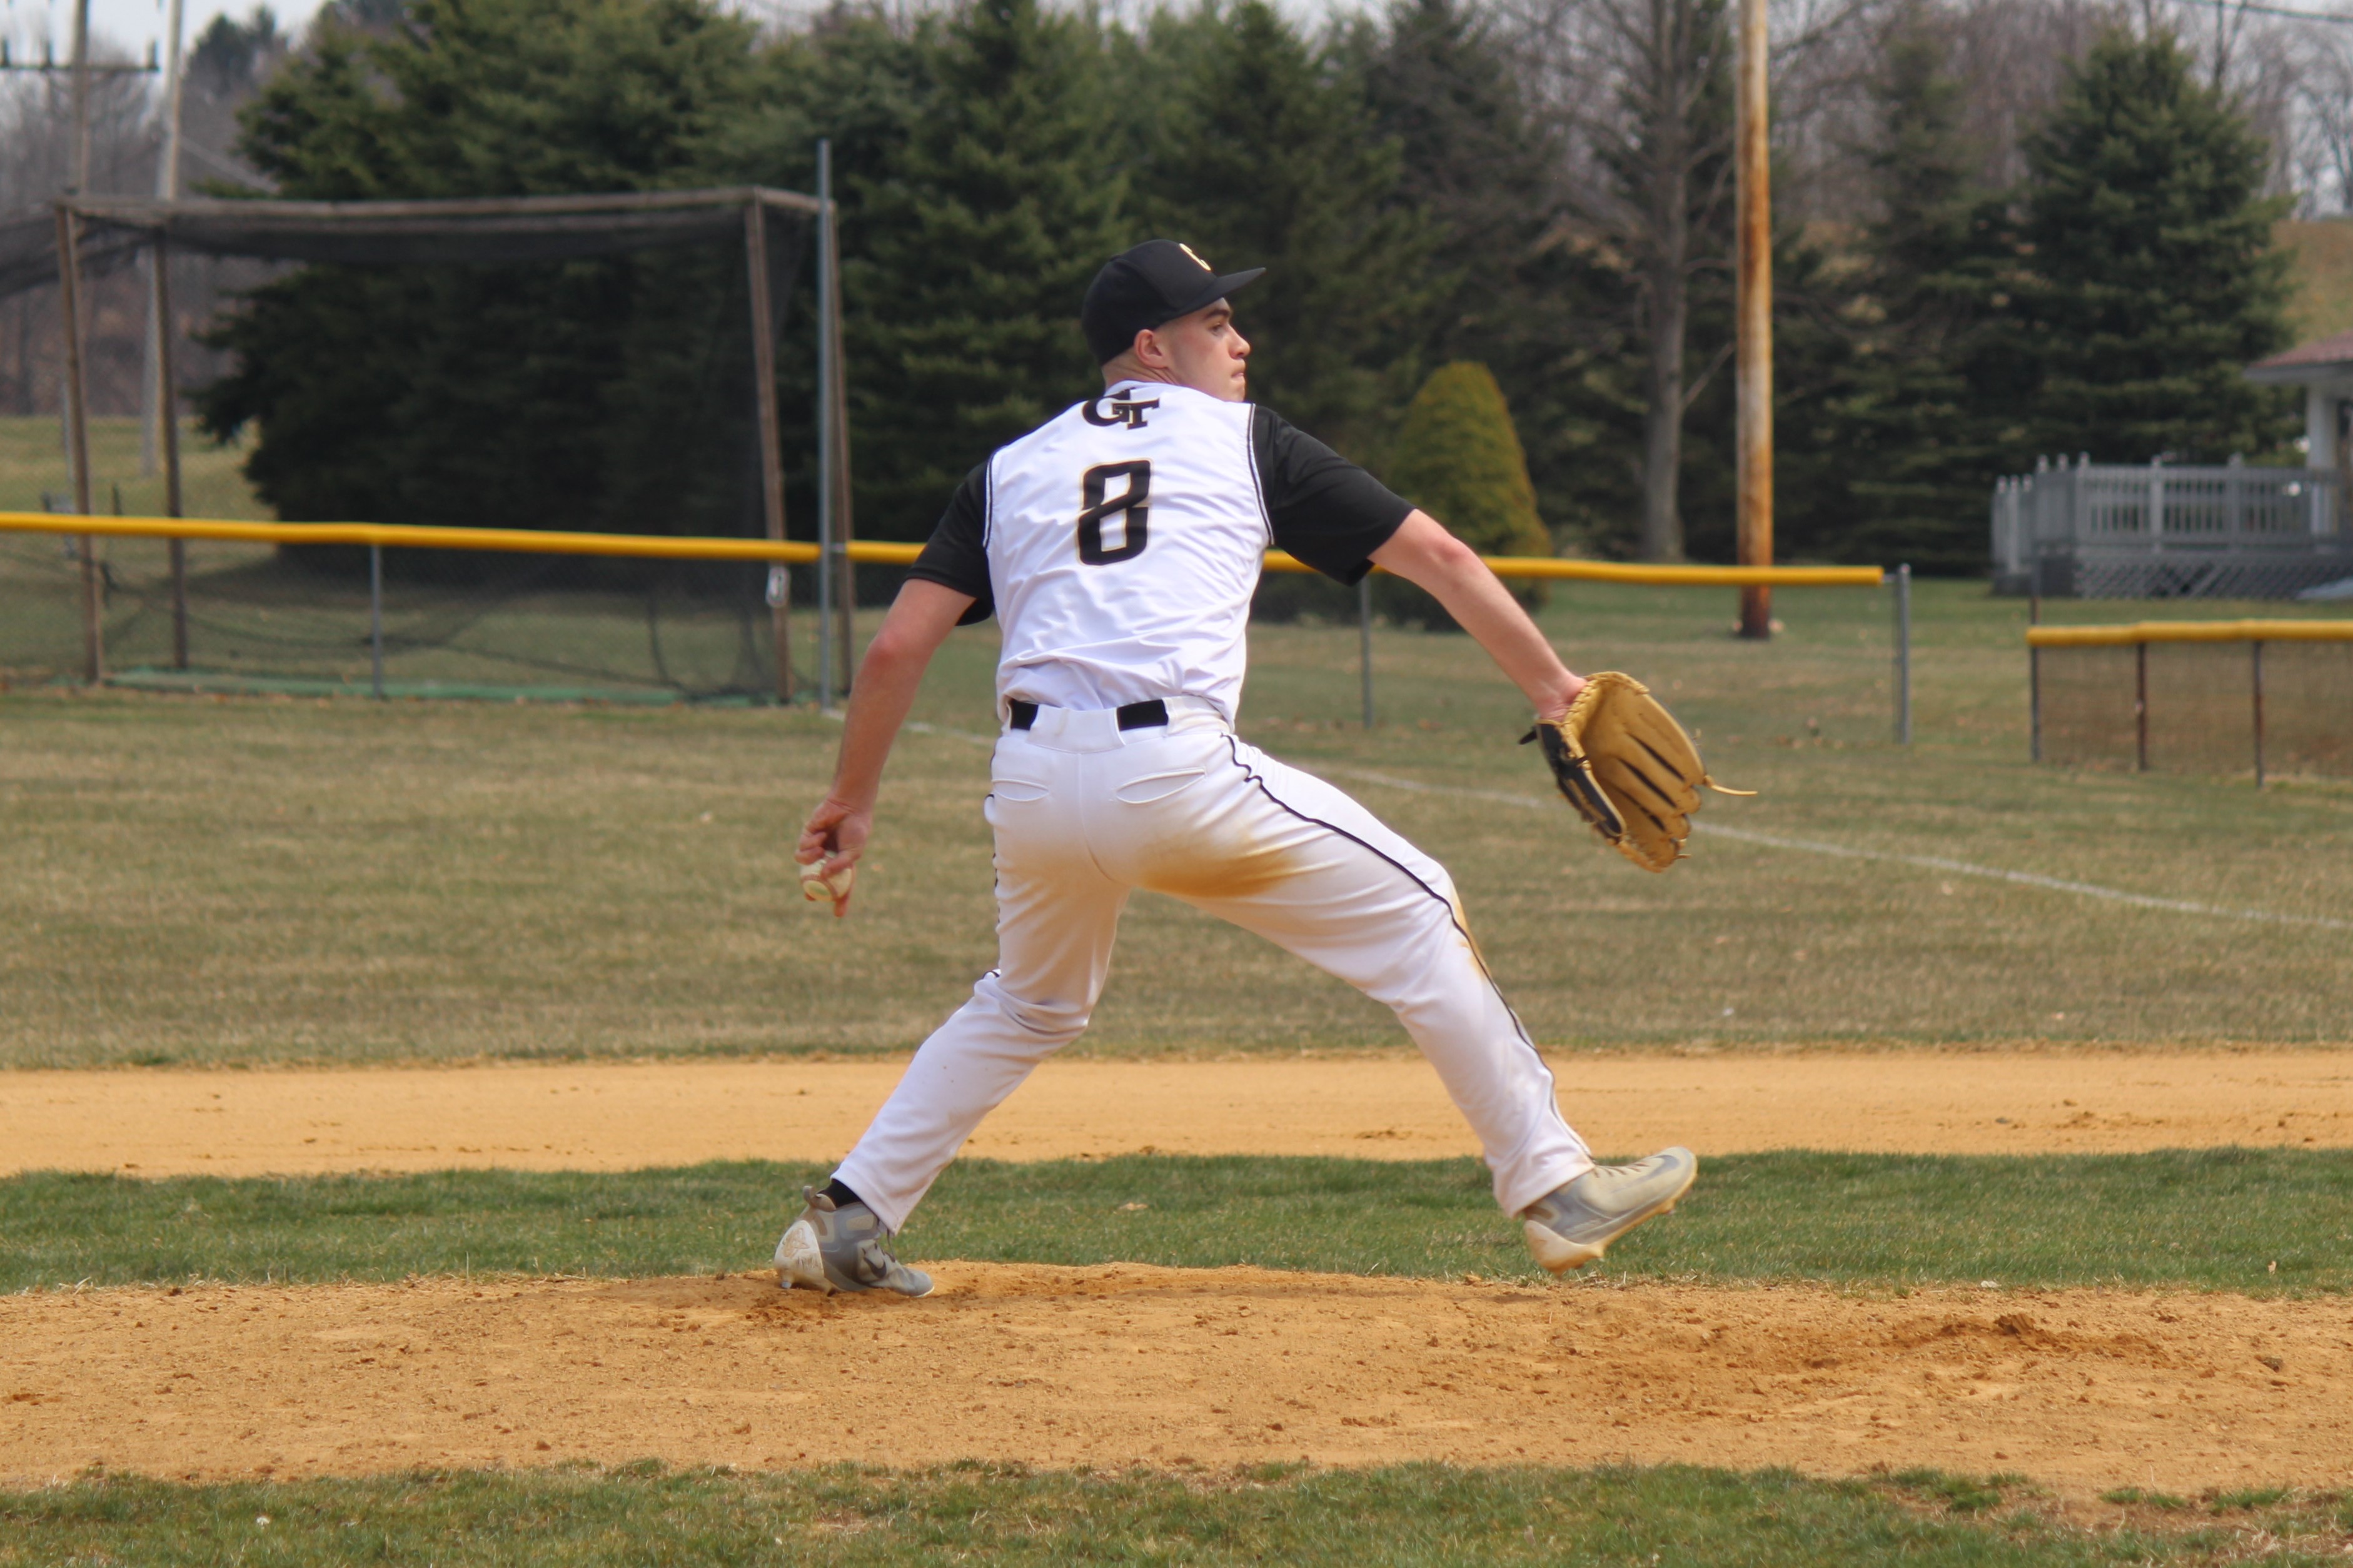 Bryce Timko held Johnsonburg to one hit in game two, adding in eight strikeouts, for his third win of the year.